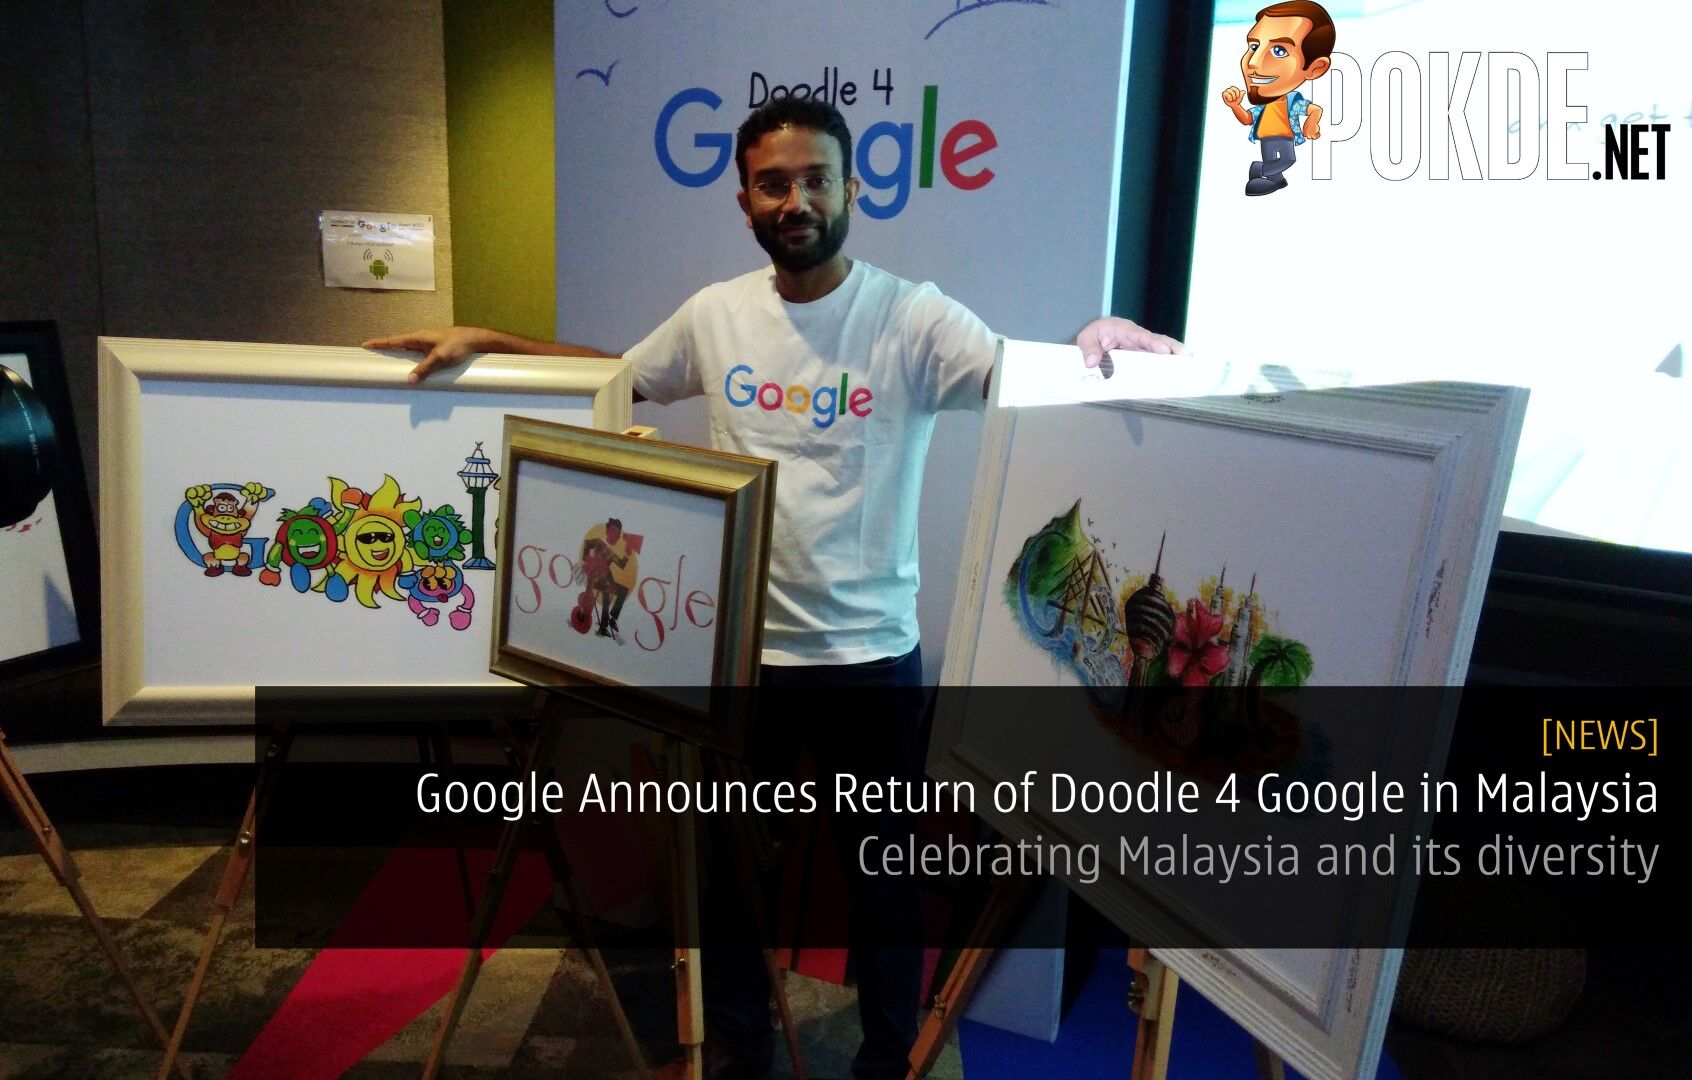 Google Announces Return of Doodle 4 Google in Malaysia - Celebrating Malaysia and its diversity 31